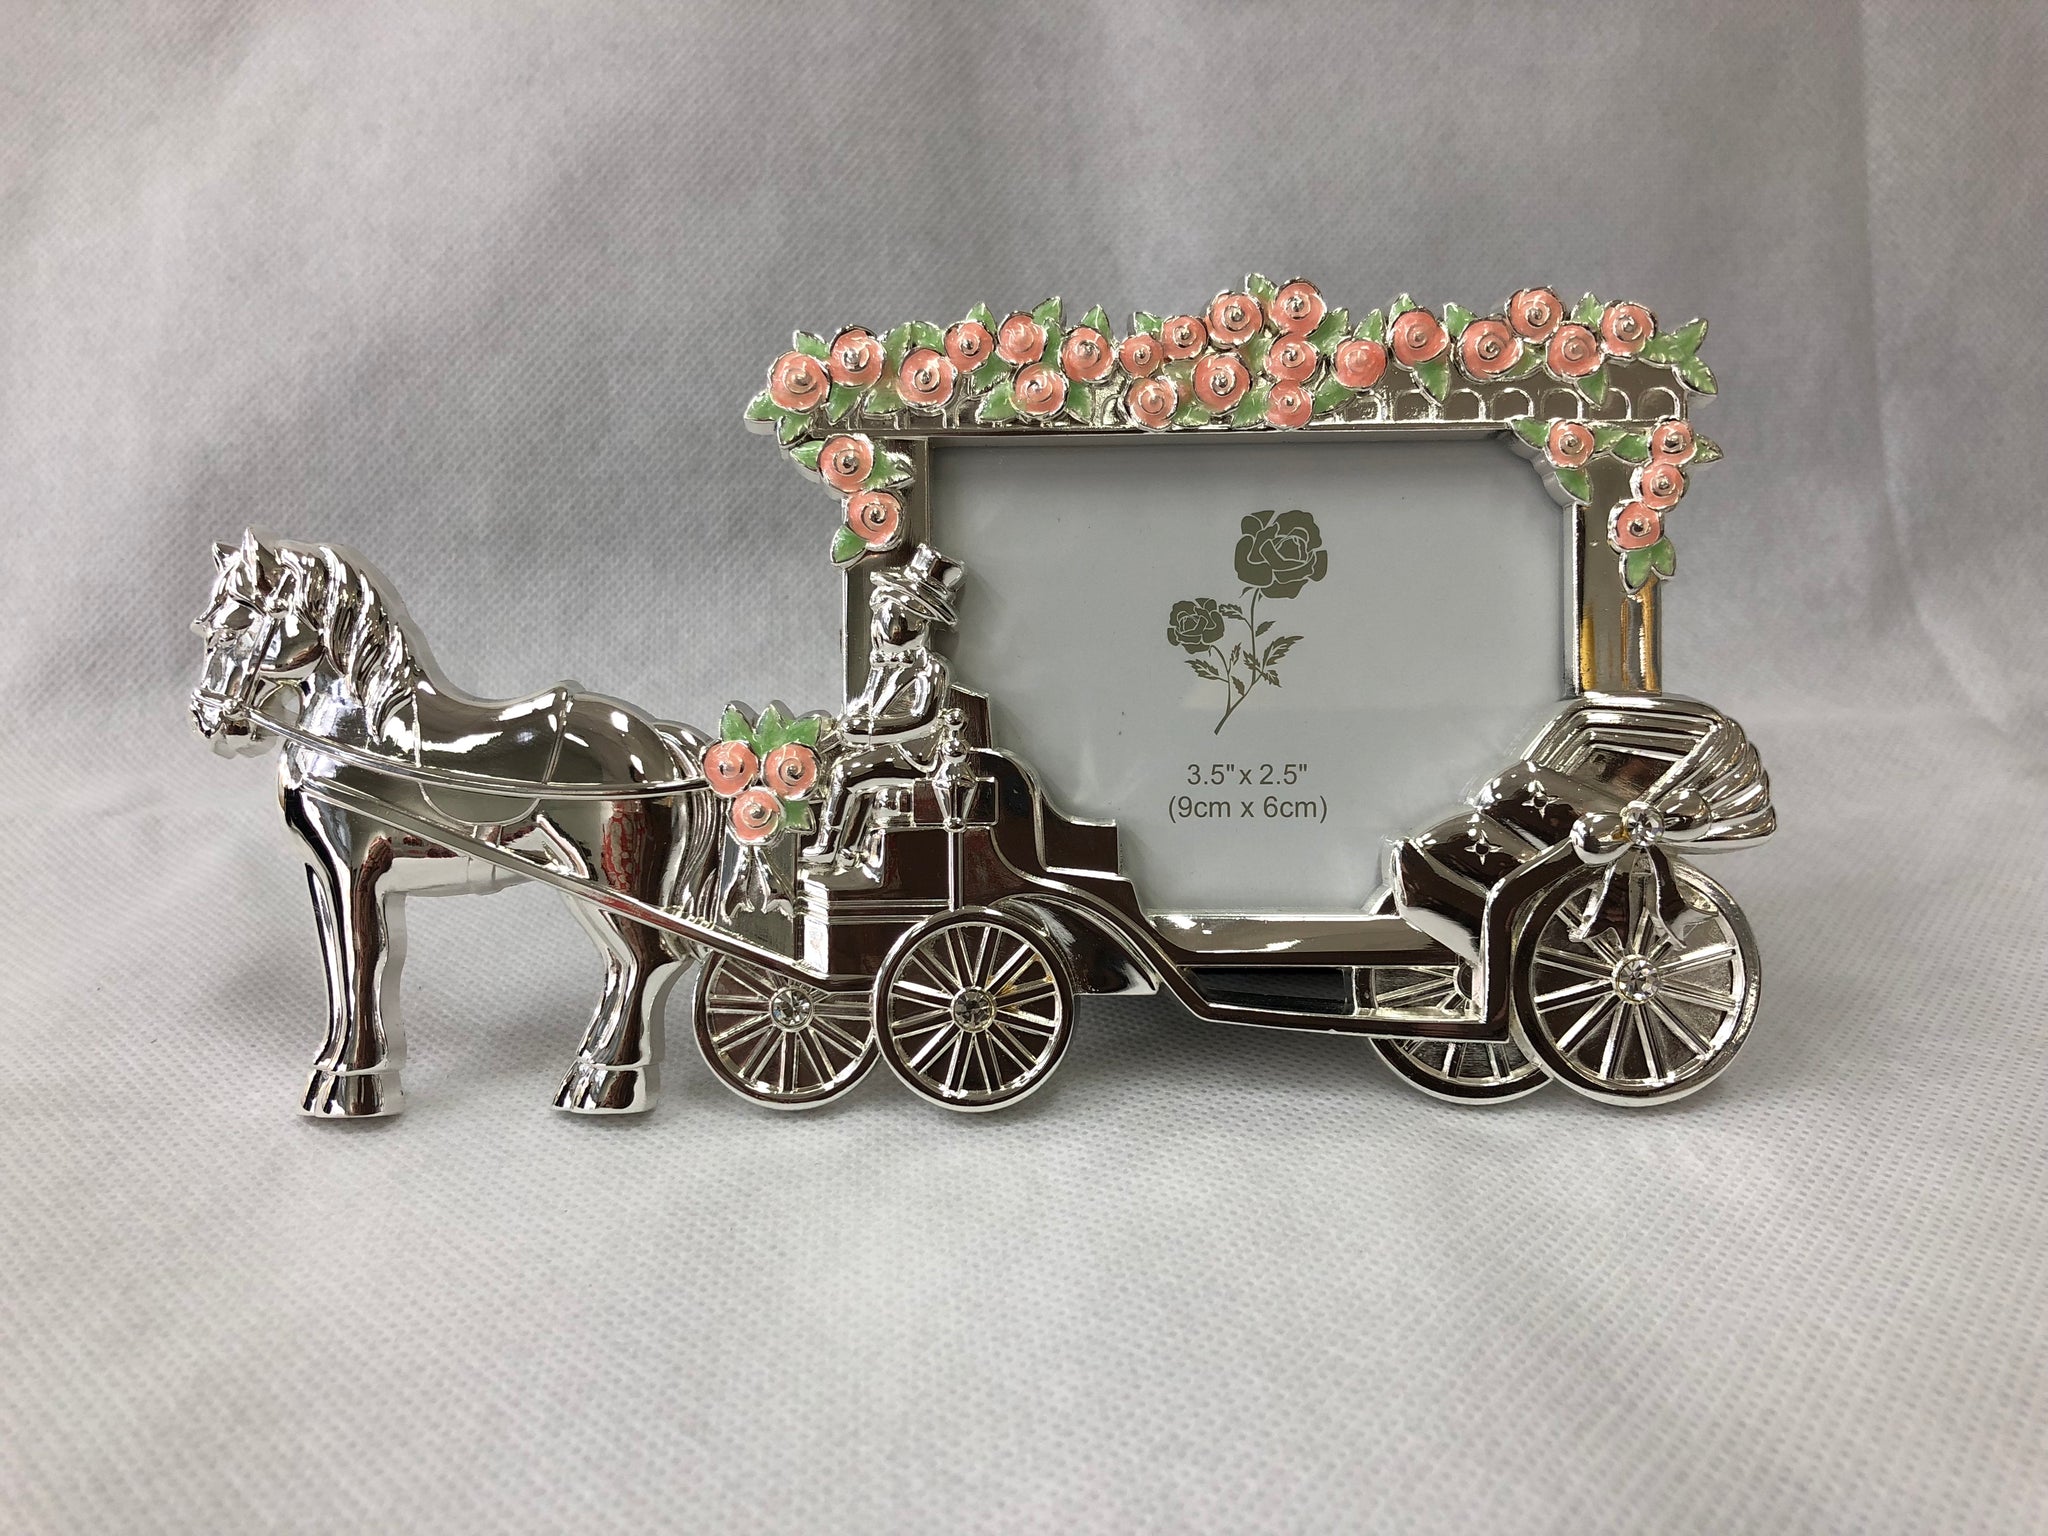 SAT-PF 10659 - Silver Plated Photo Frame -Horse Carriage